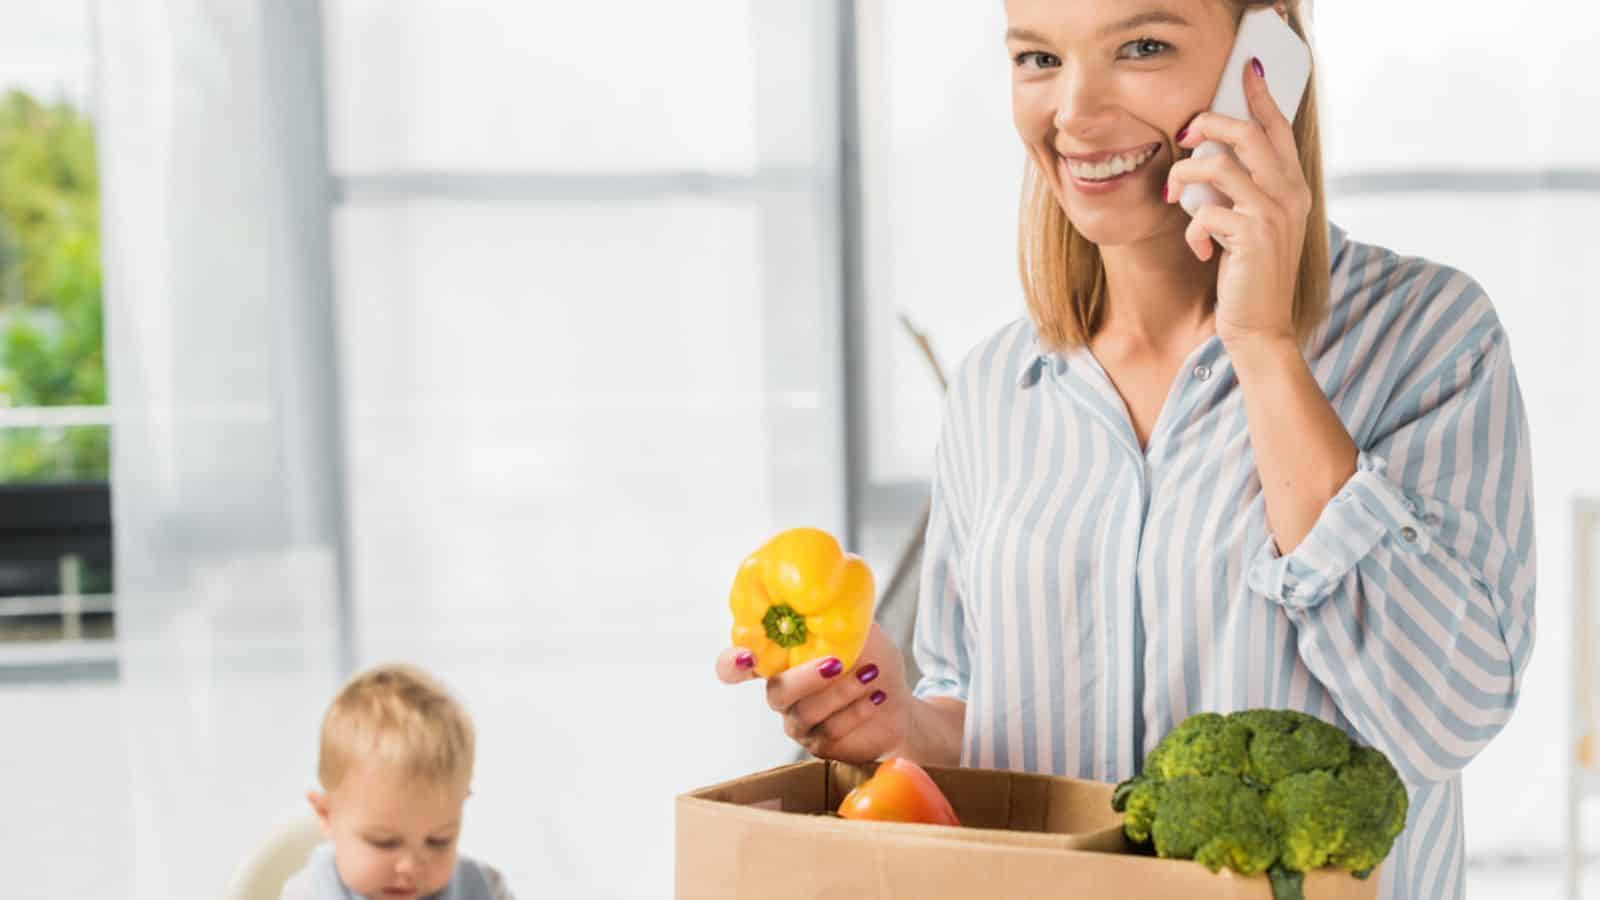 Smiling mother holding groceries while talking on smartphone